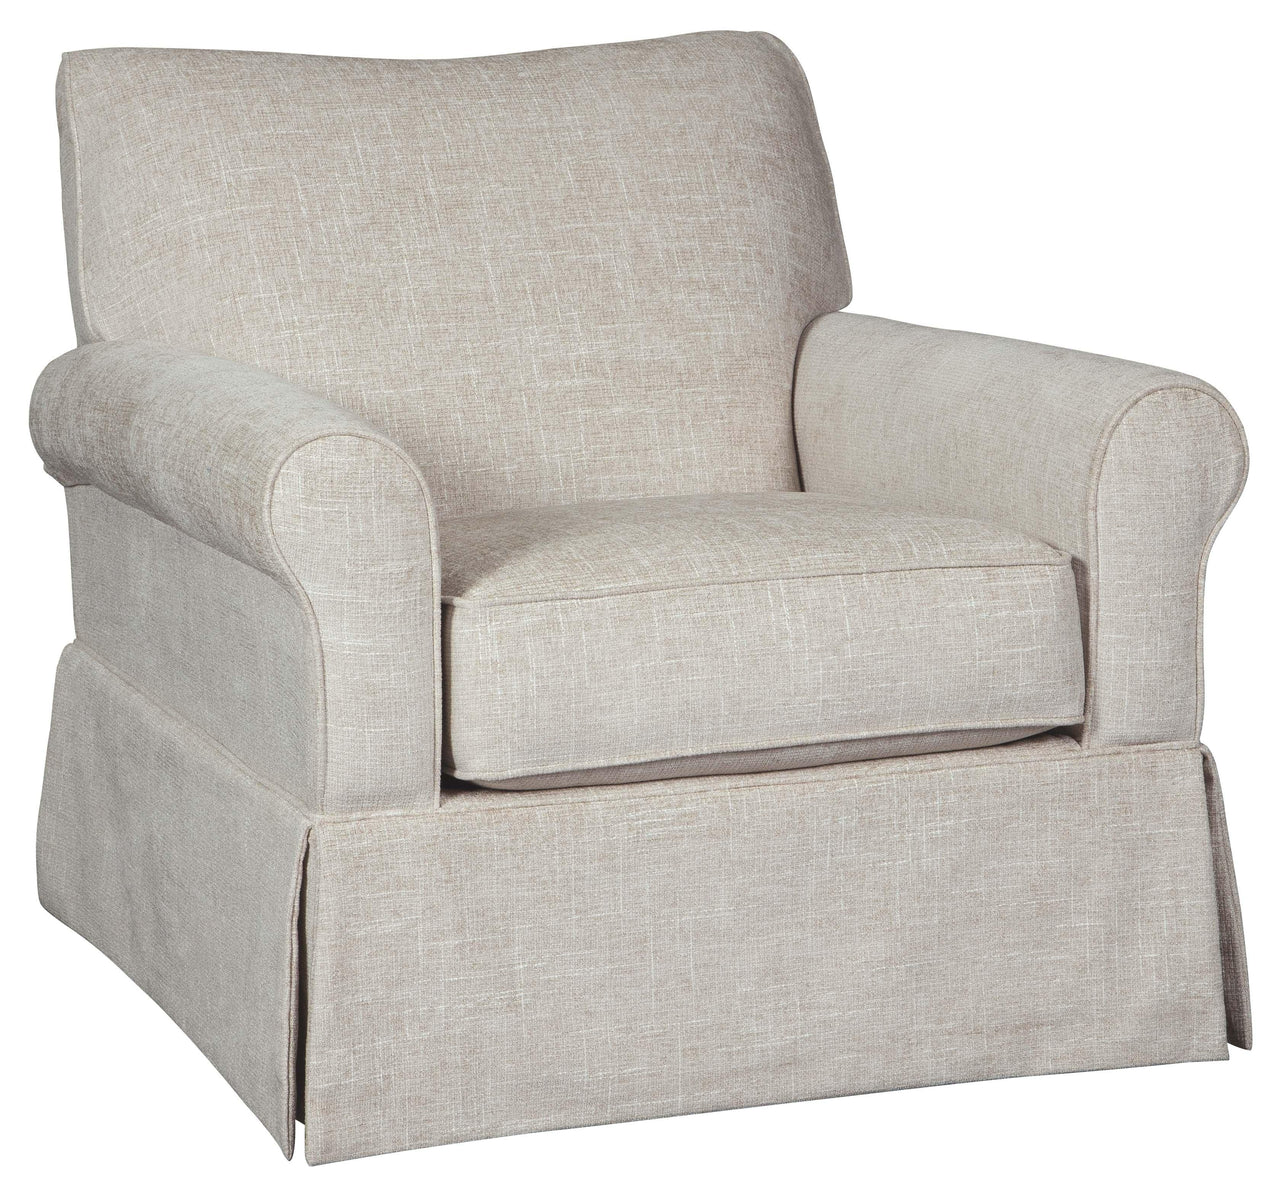 Searcy - Quartz - Swivel Glider Accent Chair Tony's Home Furnishings Furniture. Beds. Dressers. Sofas.